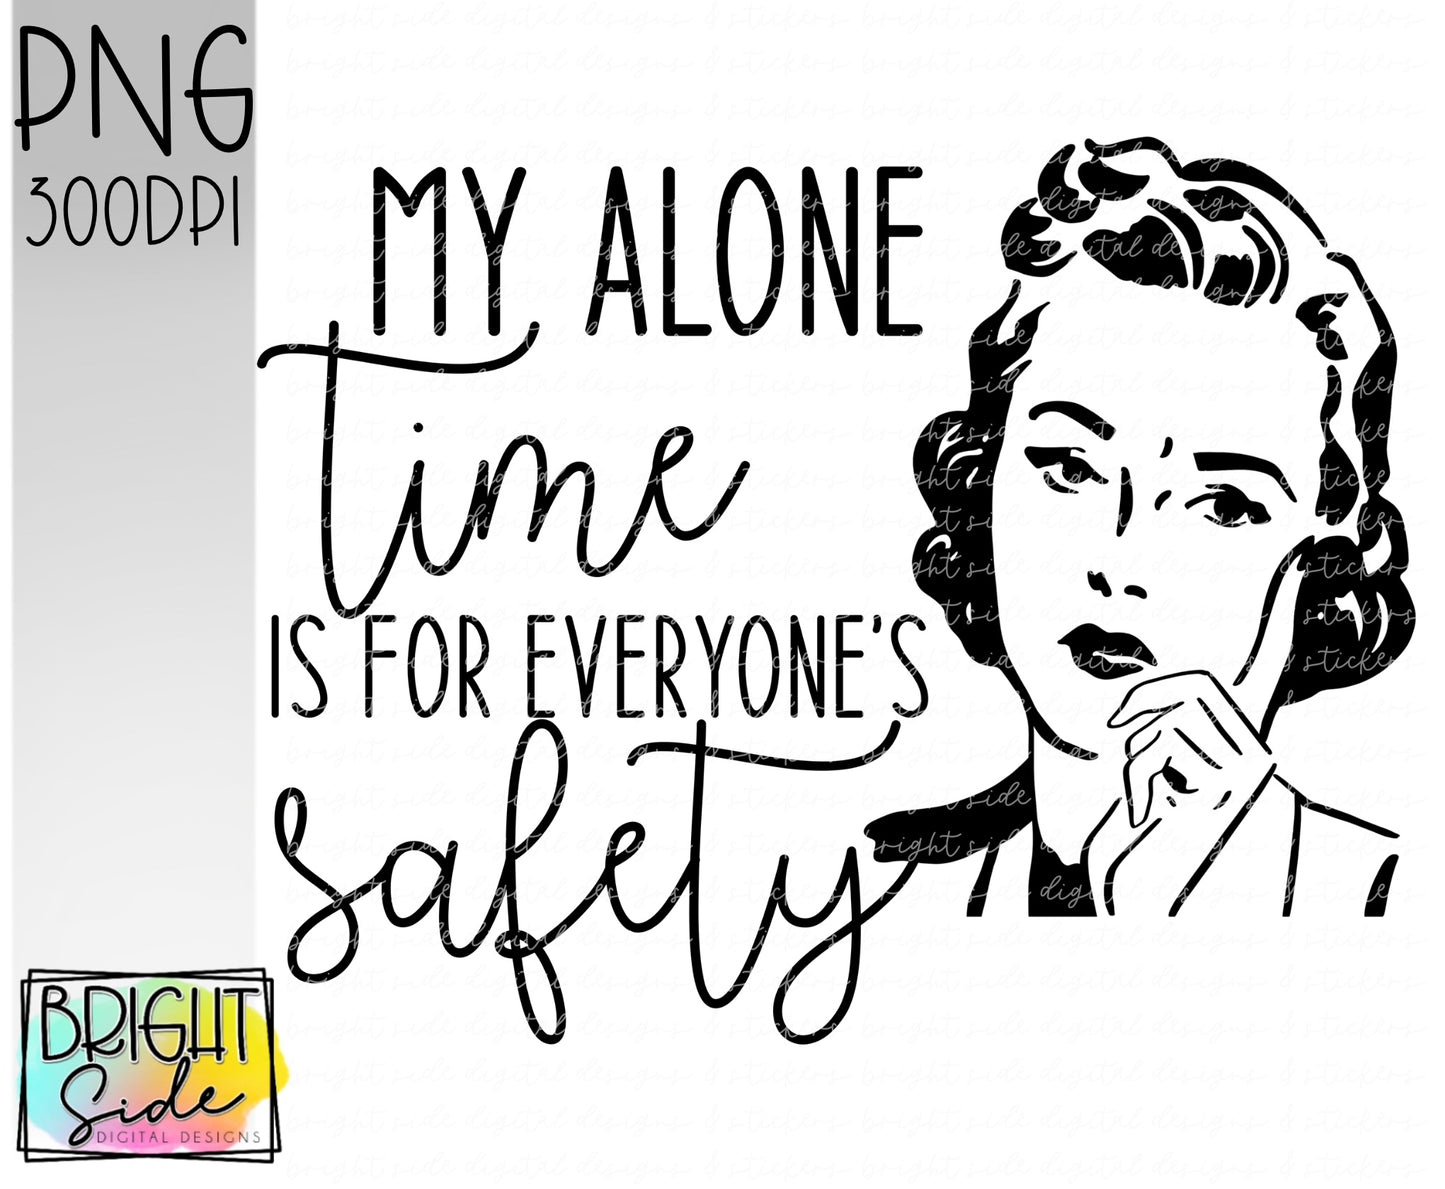 My alone time is for everyone’s safety